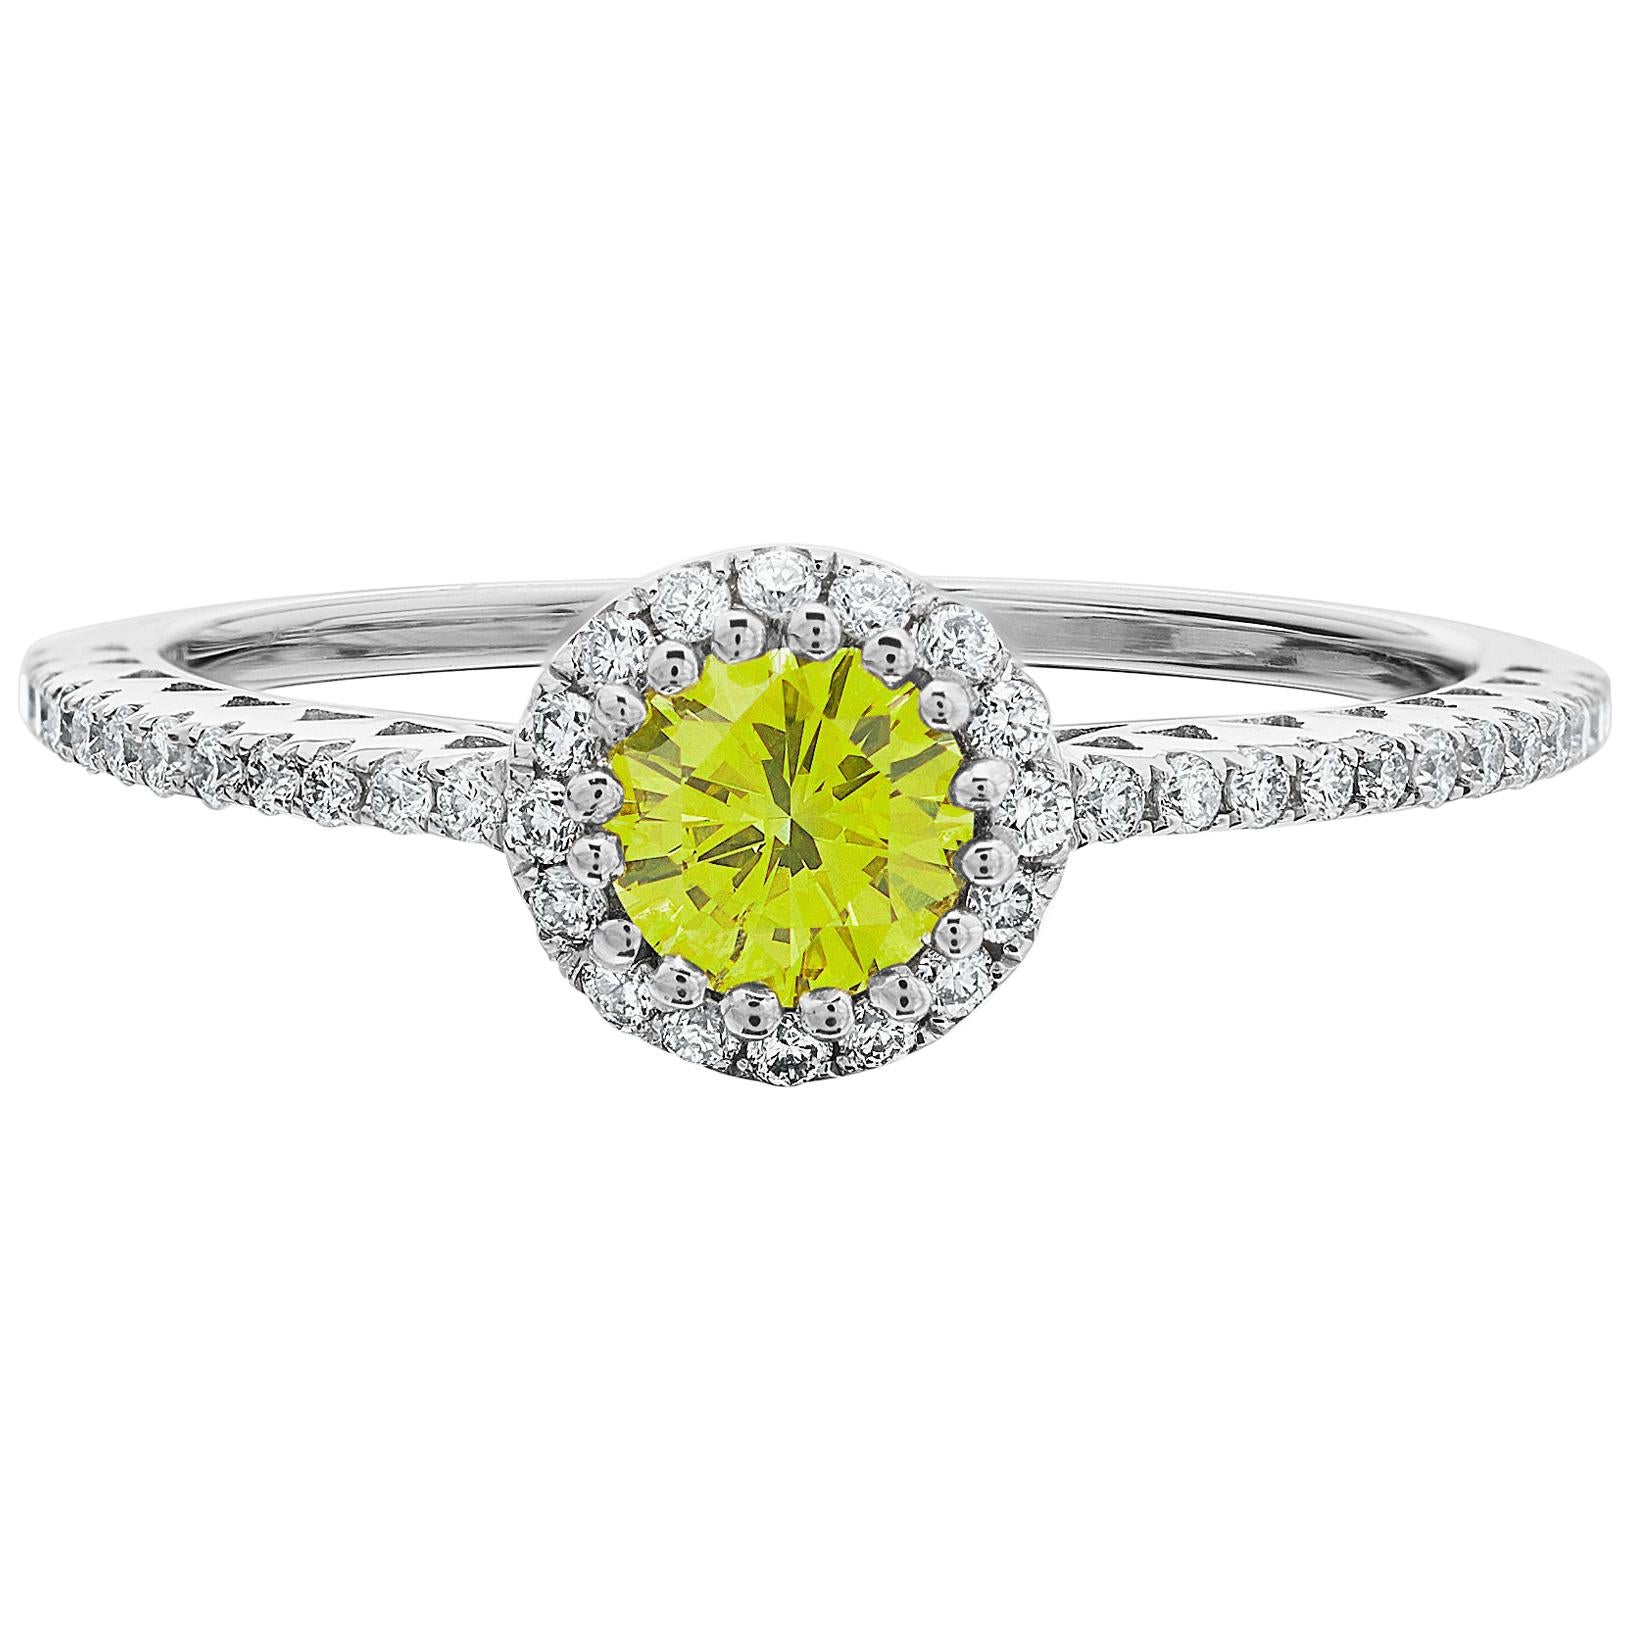 Fancy Vivid Yellow 0.36ct & White Round Brilliant Cut Diamond Cluster Ring For Sale